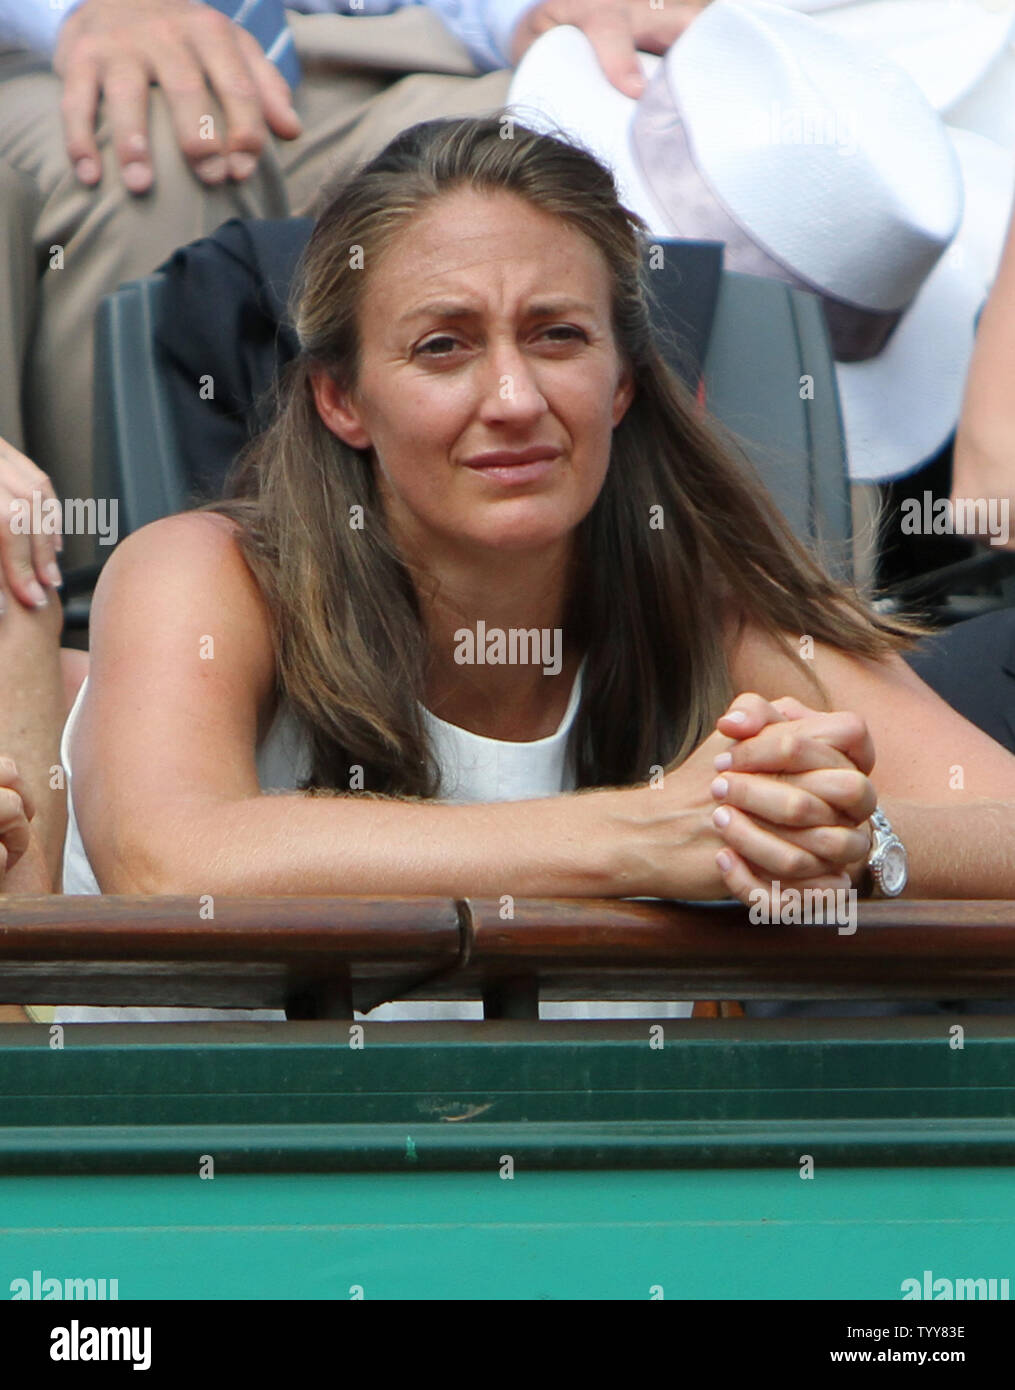 Former tennis player Mary Pierce watches the French Open womens final match between Italian Francesca Schiavone and Australian Samantha Stosur at Roland Garros in Paris on June 5, 2010.  Schiavone defeated Stosur 6-4, 7-6(2) to become the first Italian ever to win a Grand Slam title.   UPI/David Silpa Stock Photo